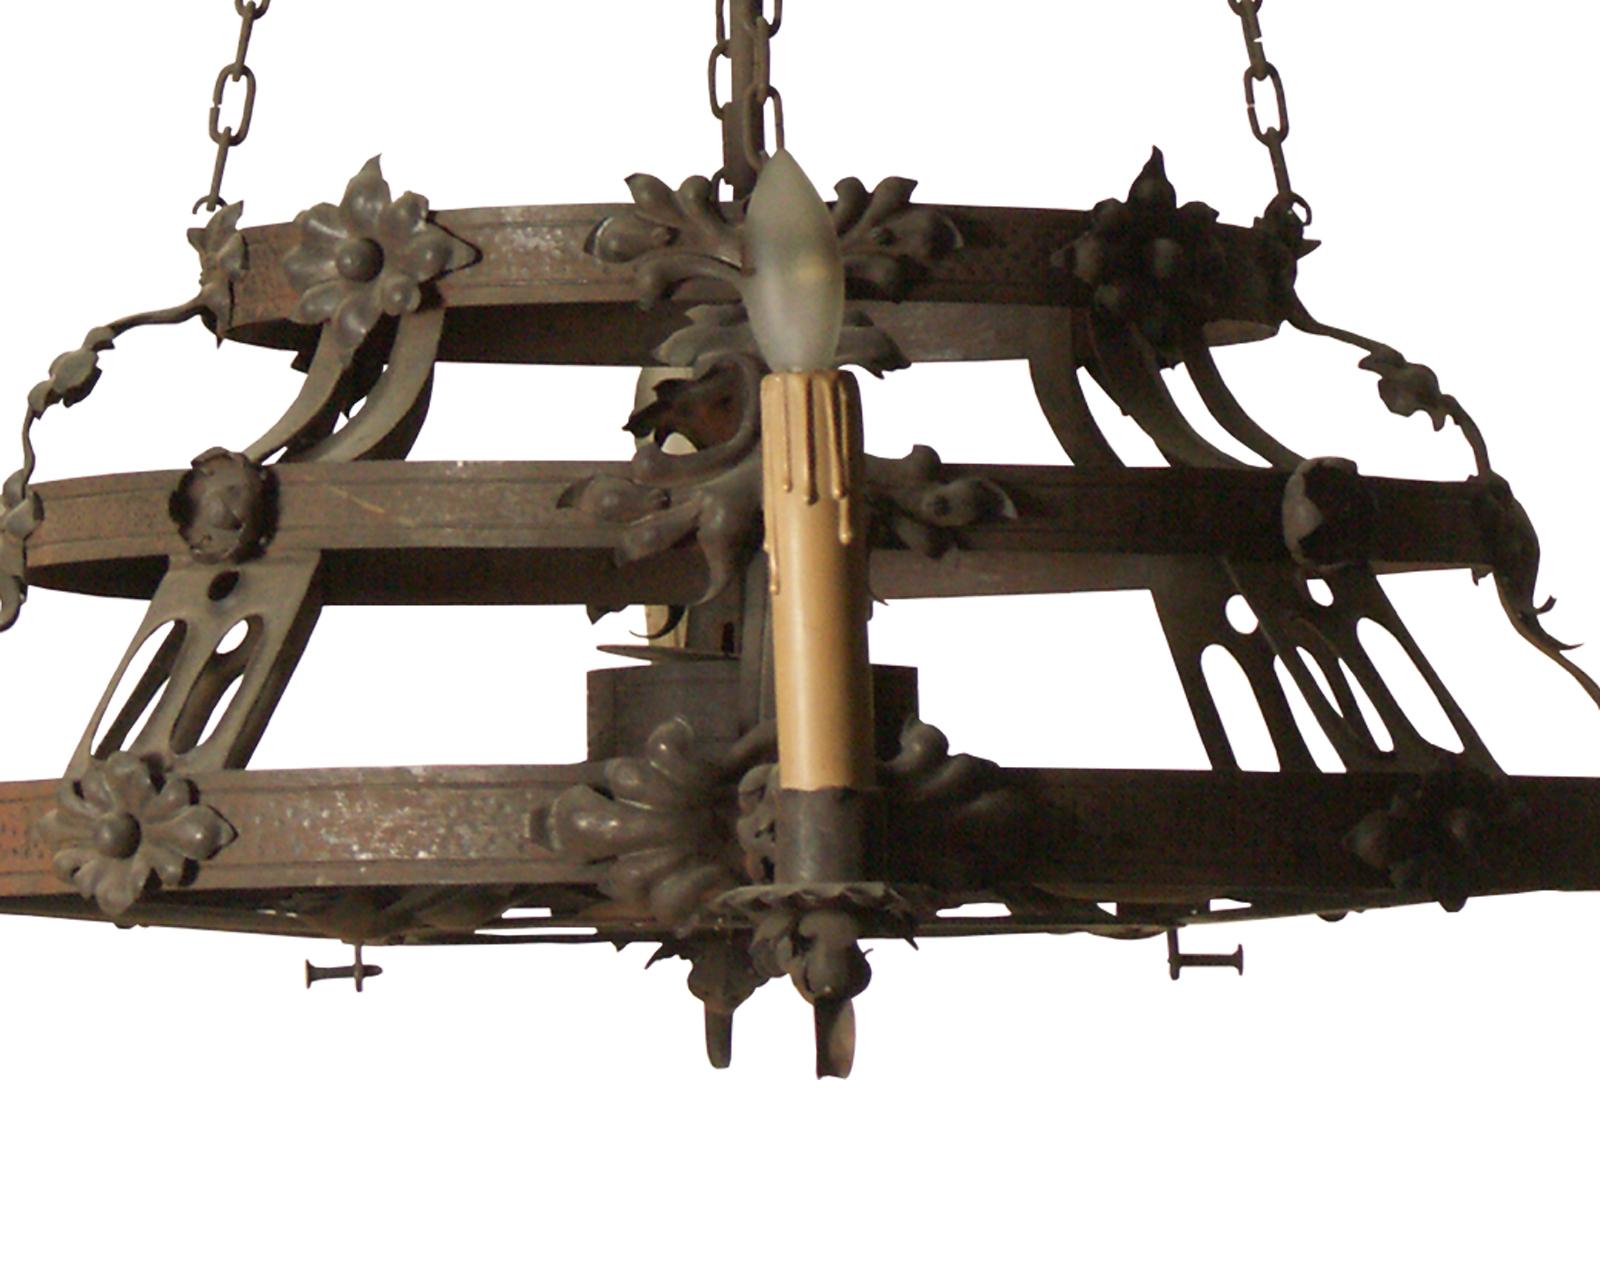 Austrian Original Early 20th Century 1915 Handcrafted Wrought Iron Chandelier For Sale